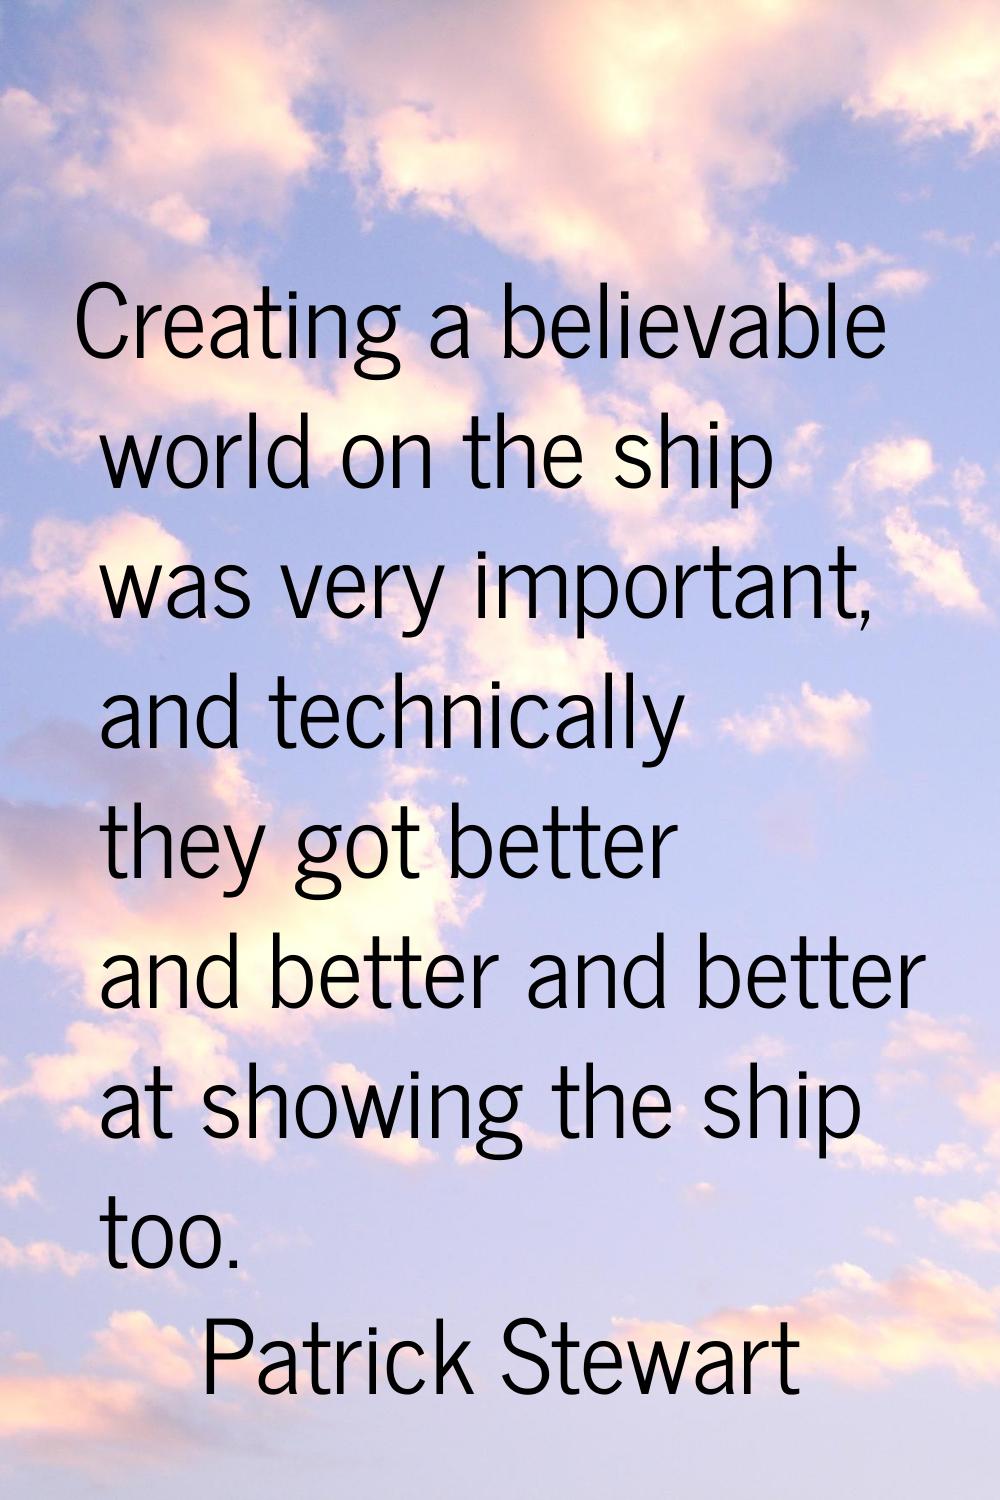 Creating a believable world on the ship was very important, and technically they got better and bet